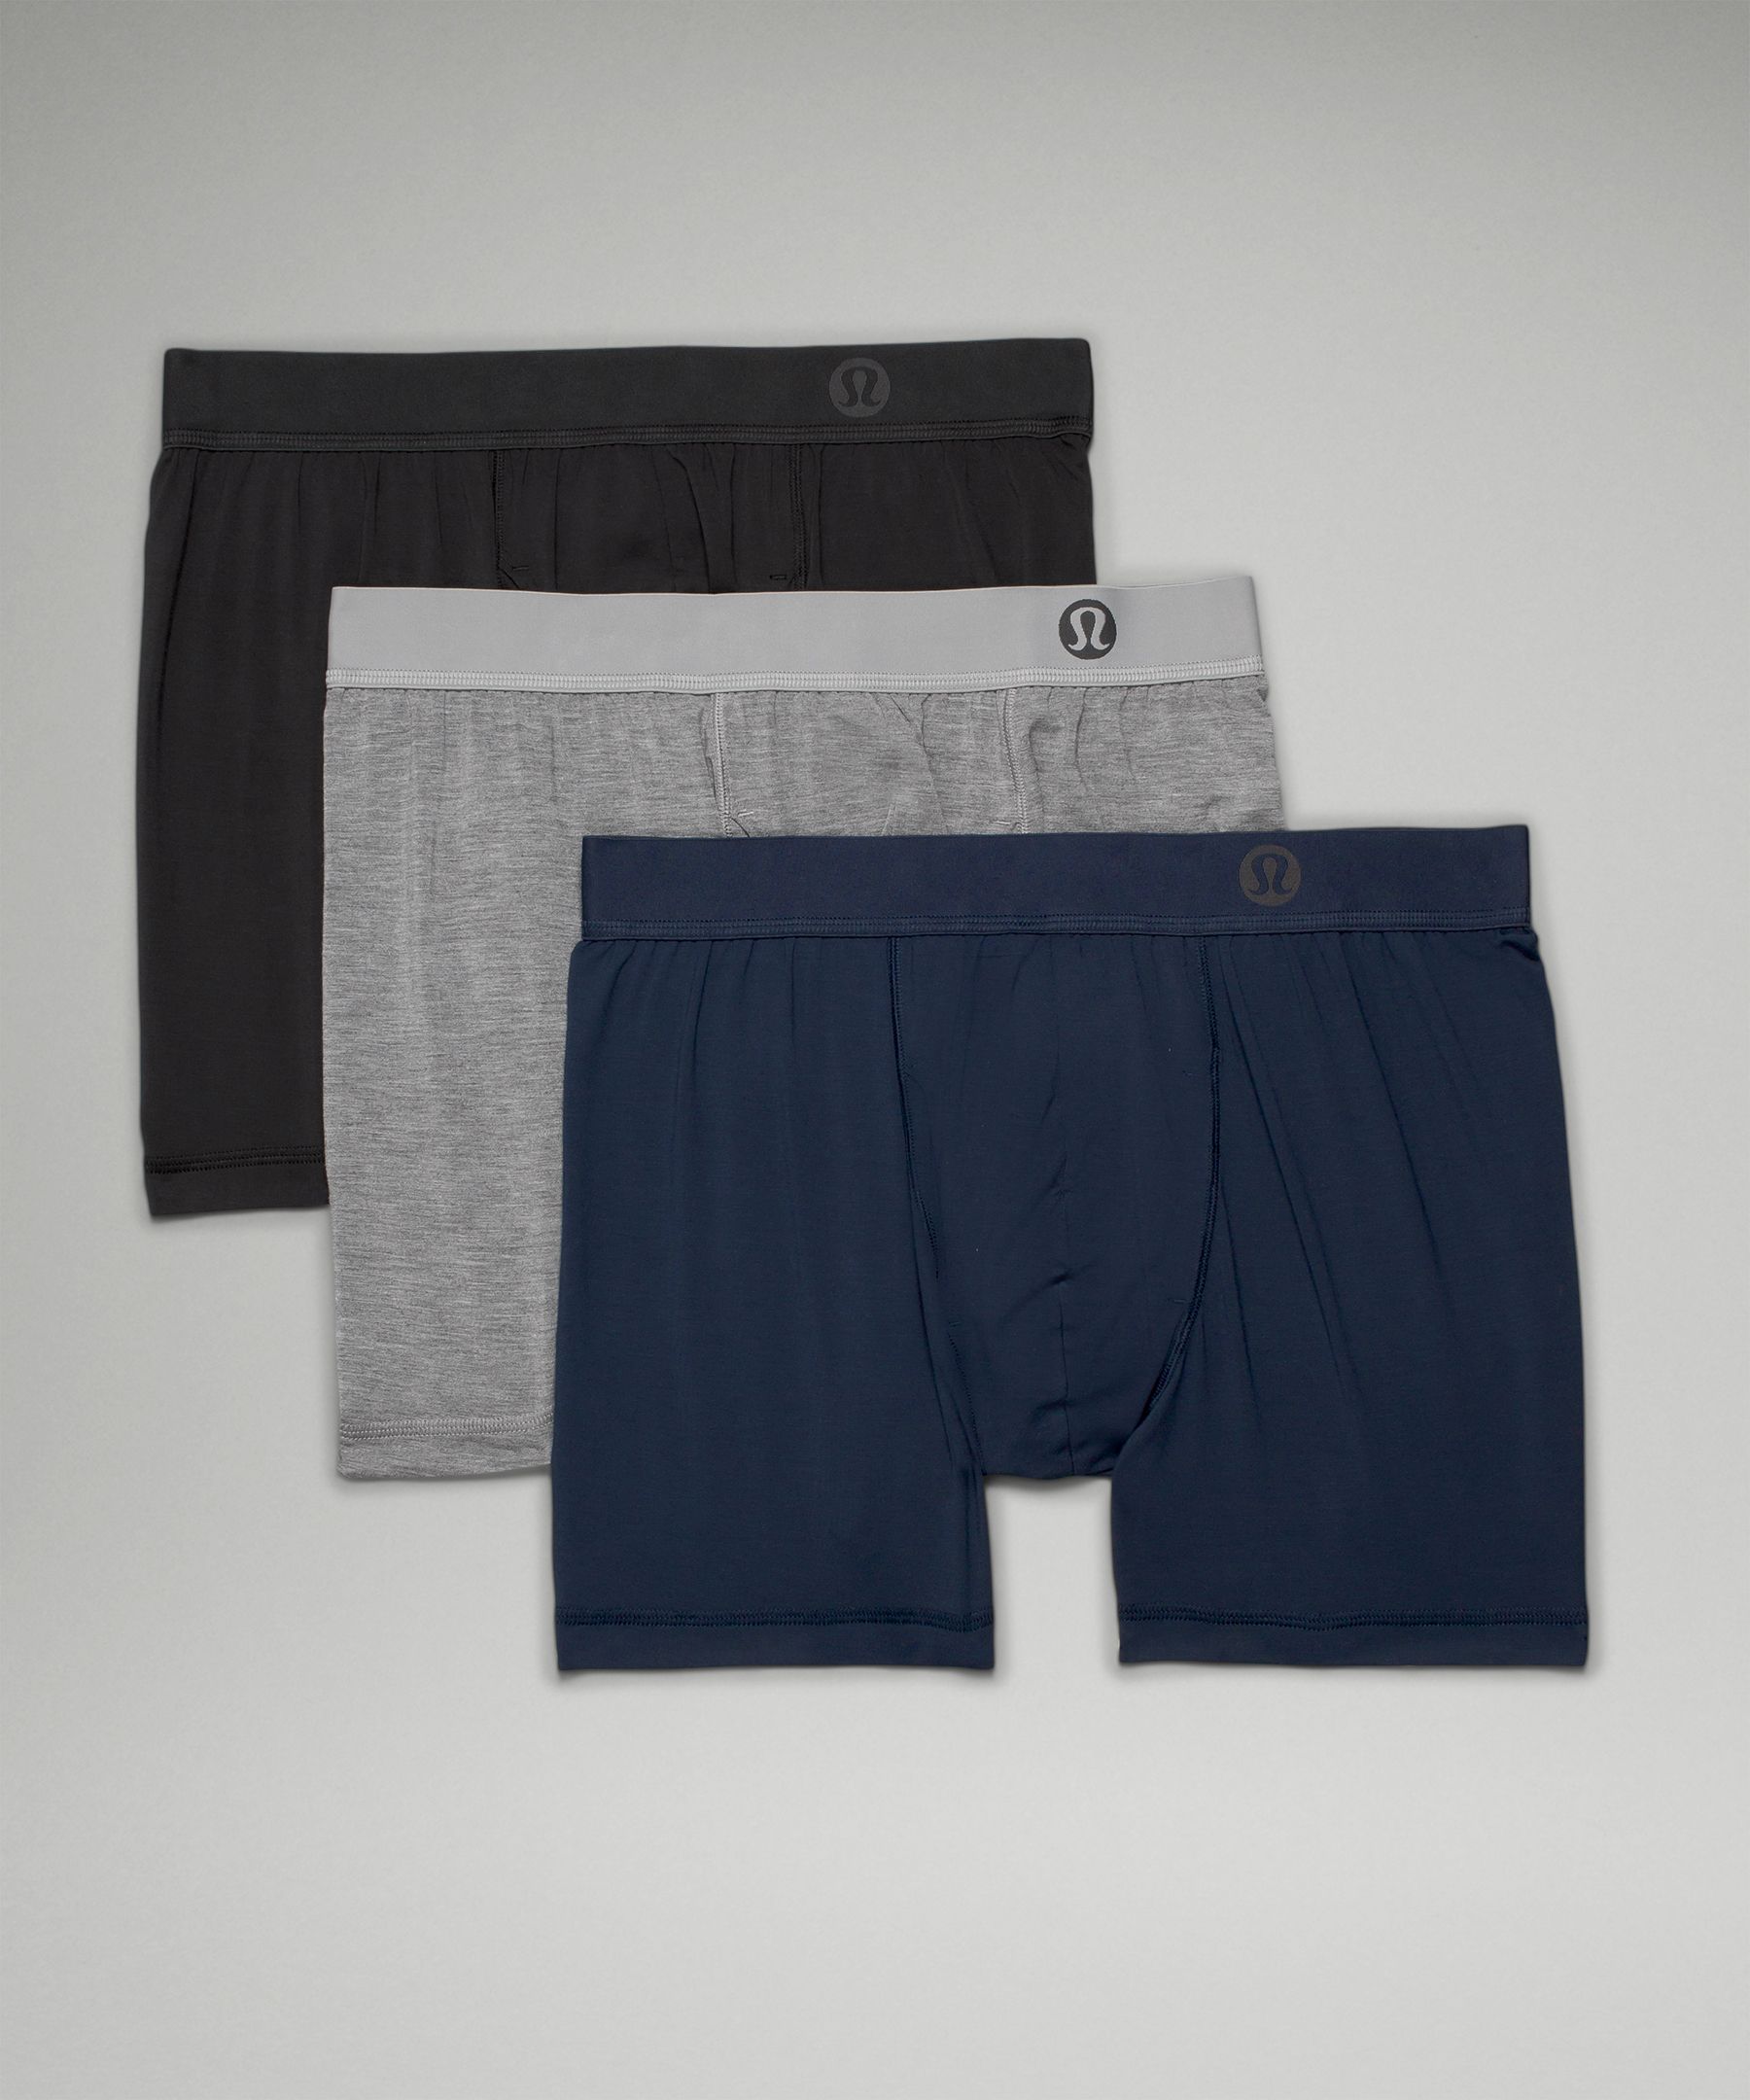 Lululemon Always In Motion Boxers With Fly 5" 3 Pack In Black/heathered Core Medium Grey/true Navy